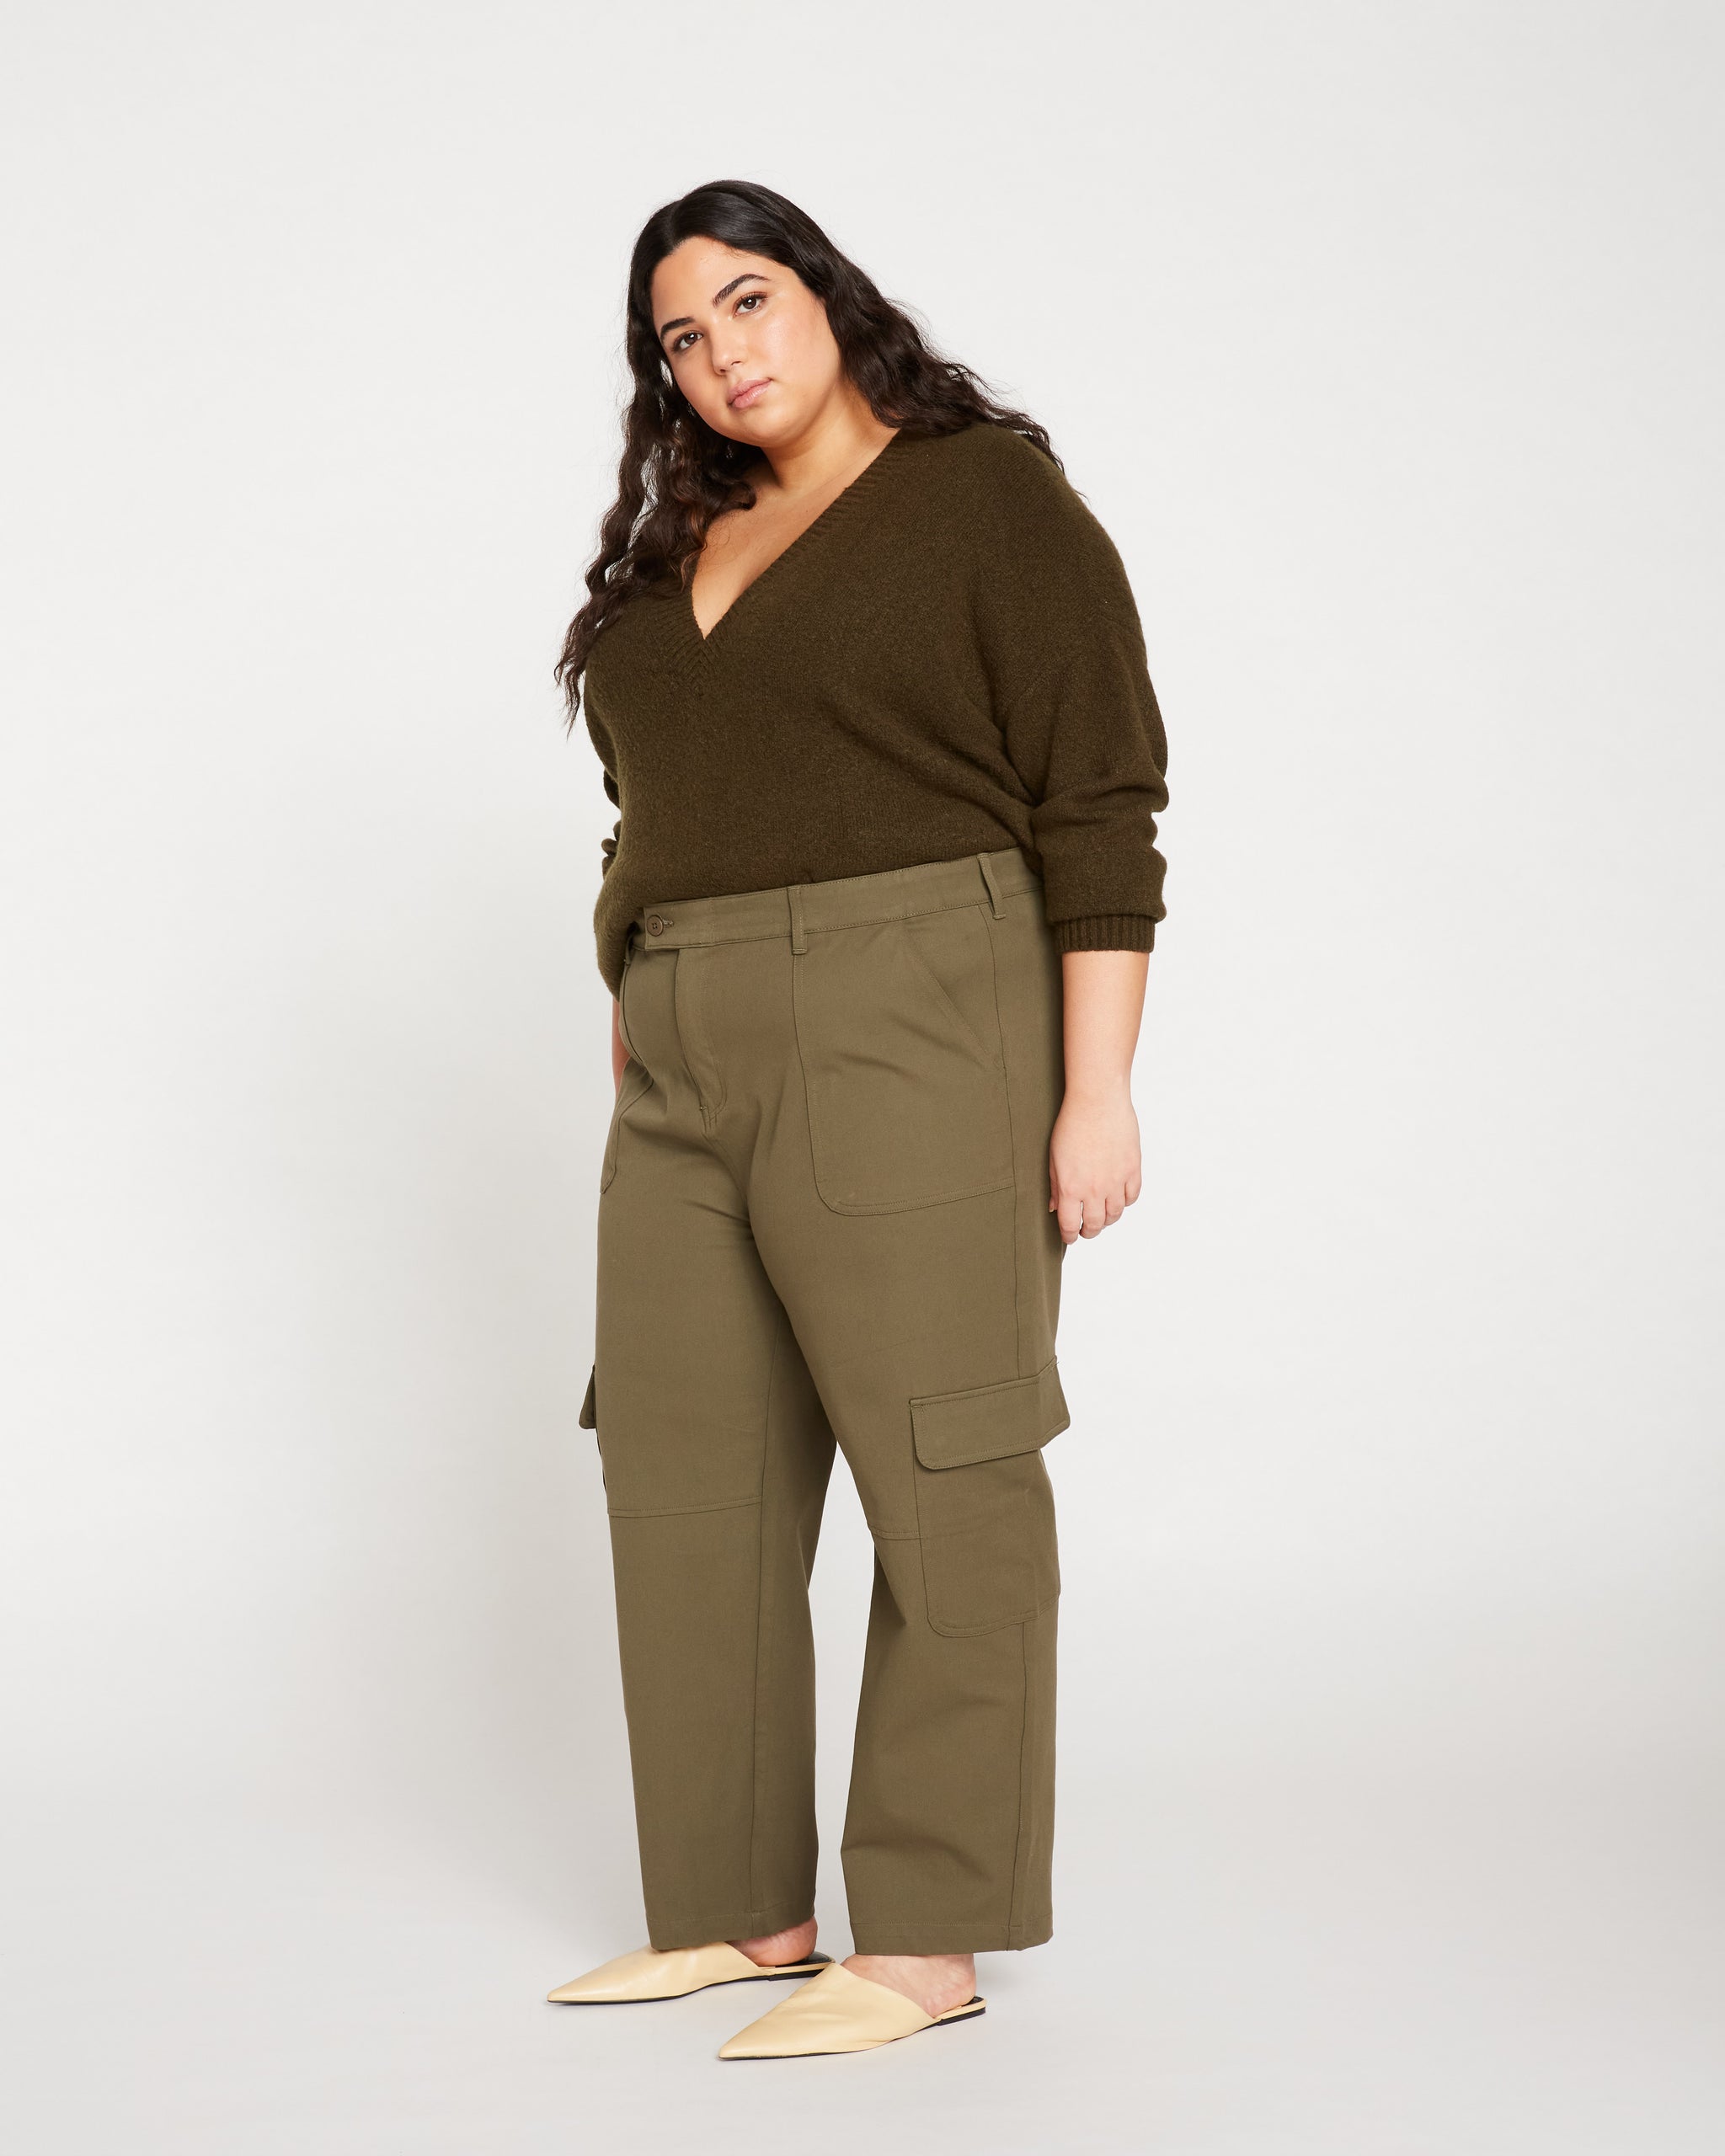 Karlee Stretch Cotton Twill Cargo Pants - Ivy